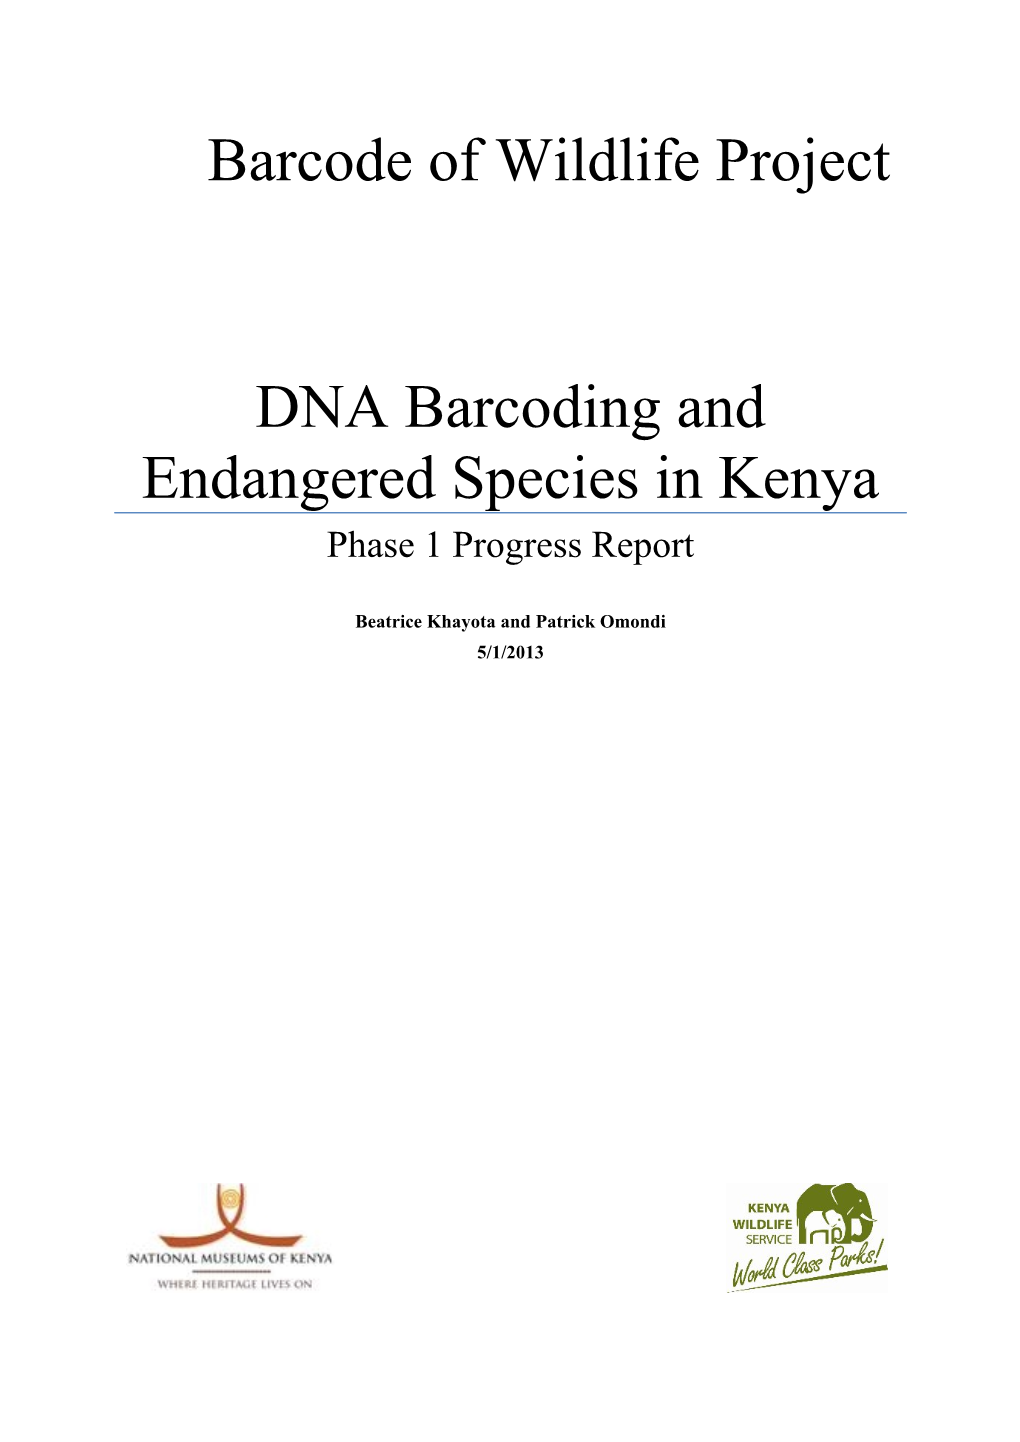 Barcode of Wildlife Project DNA Barcoding and Endangered